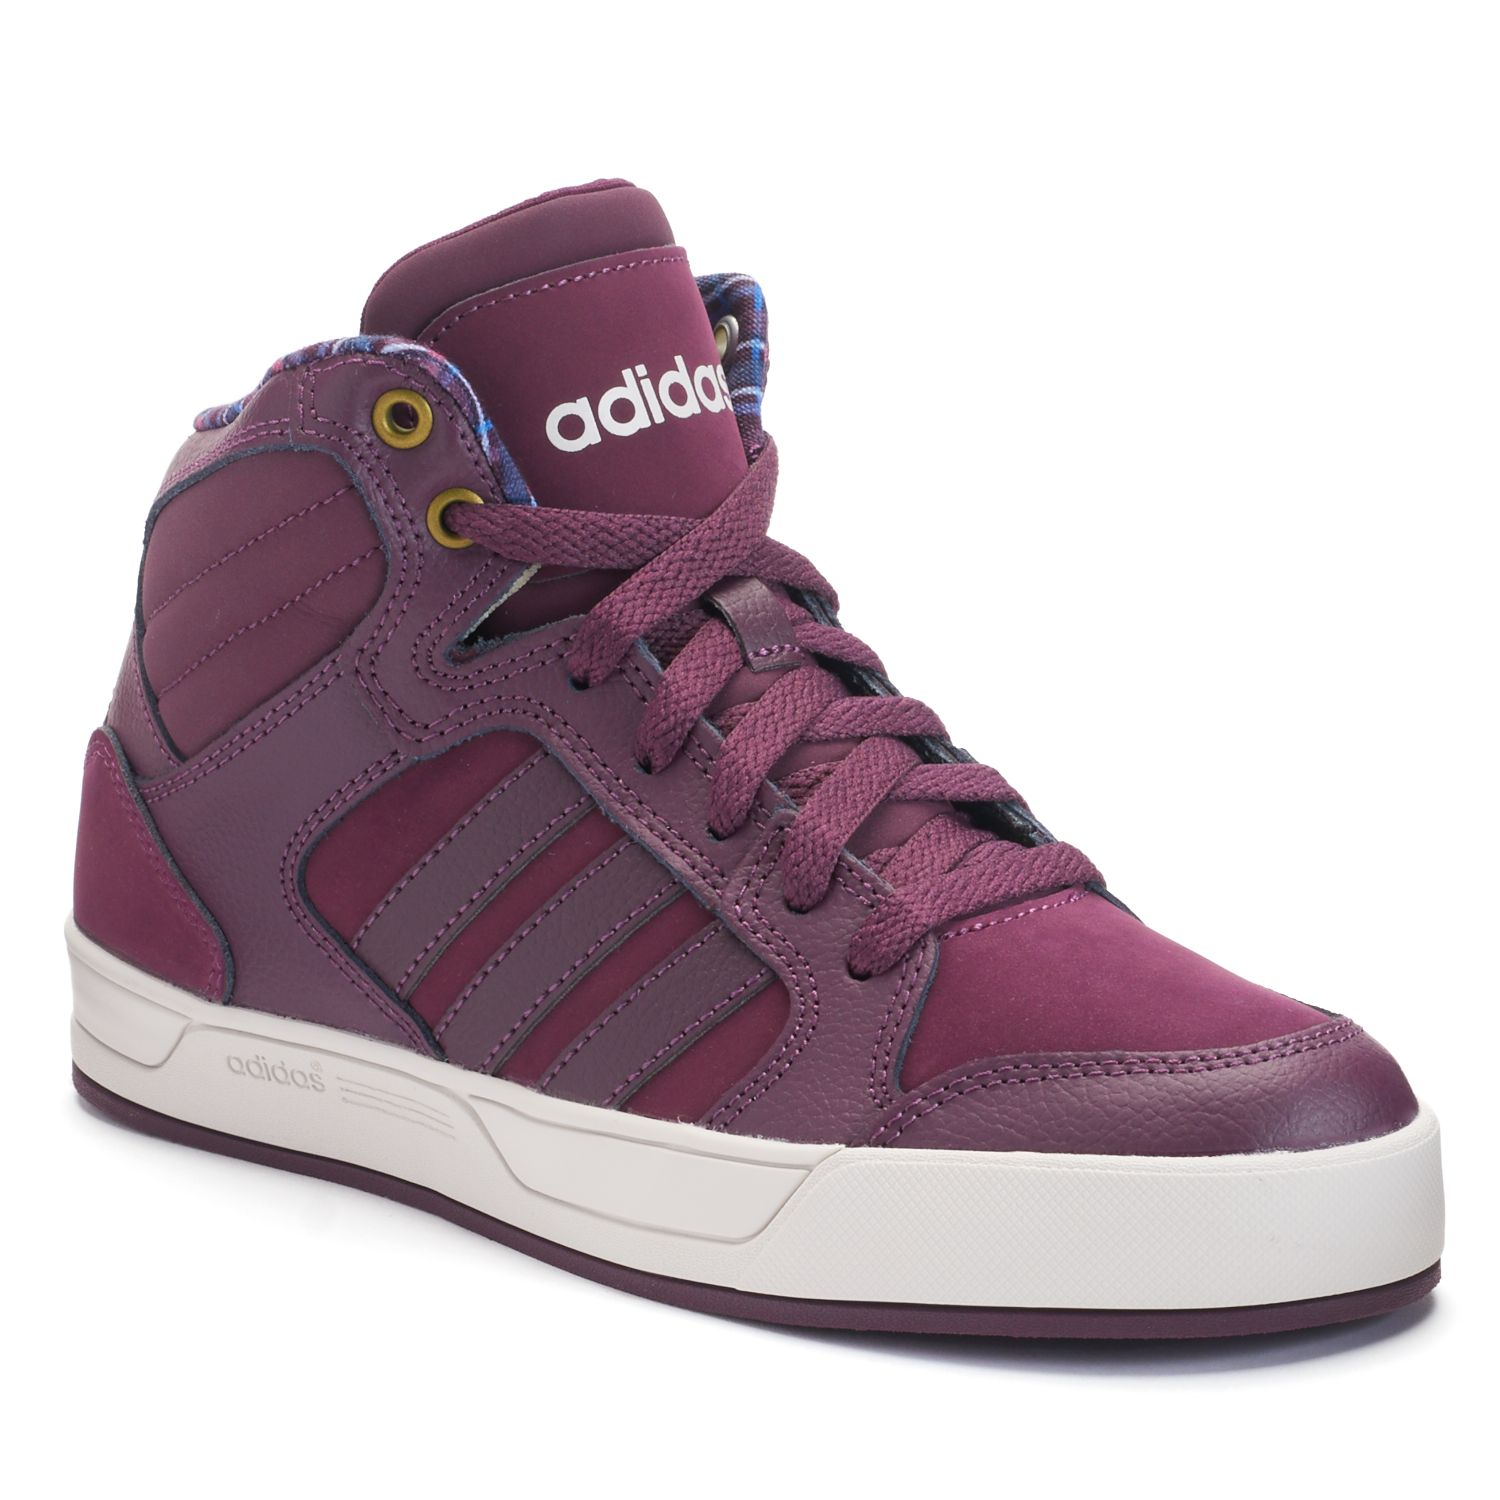 adidas NEO Raleigh Mid Women's Shoes